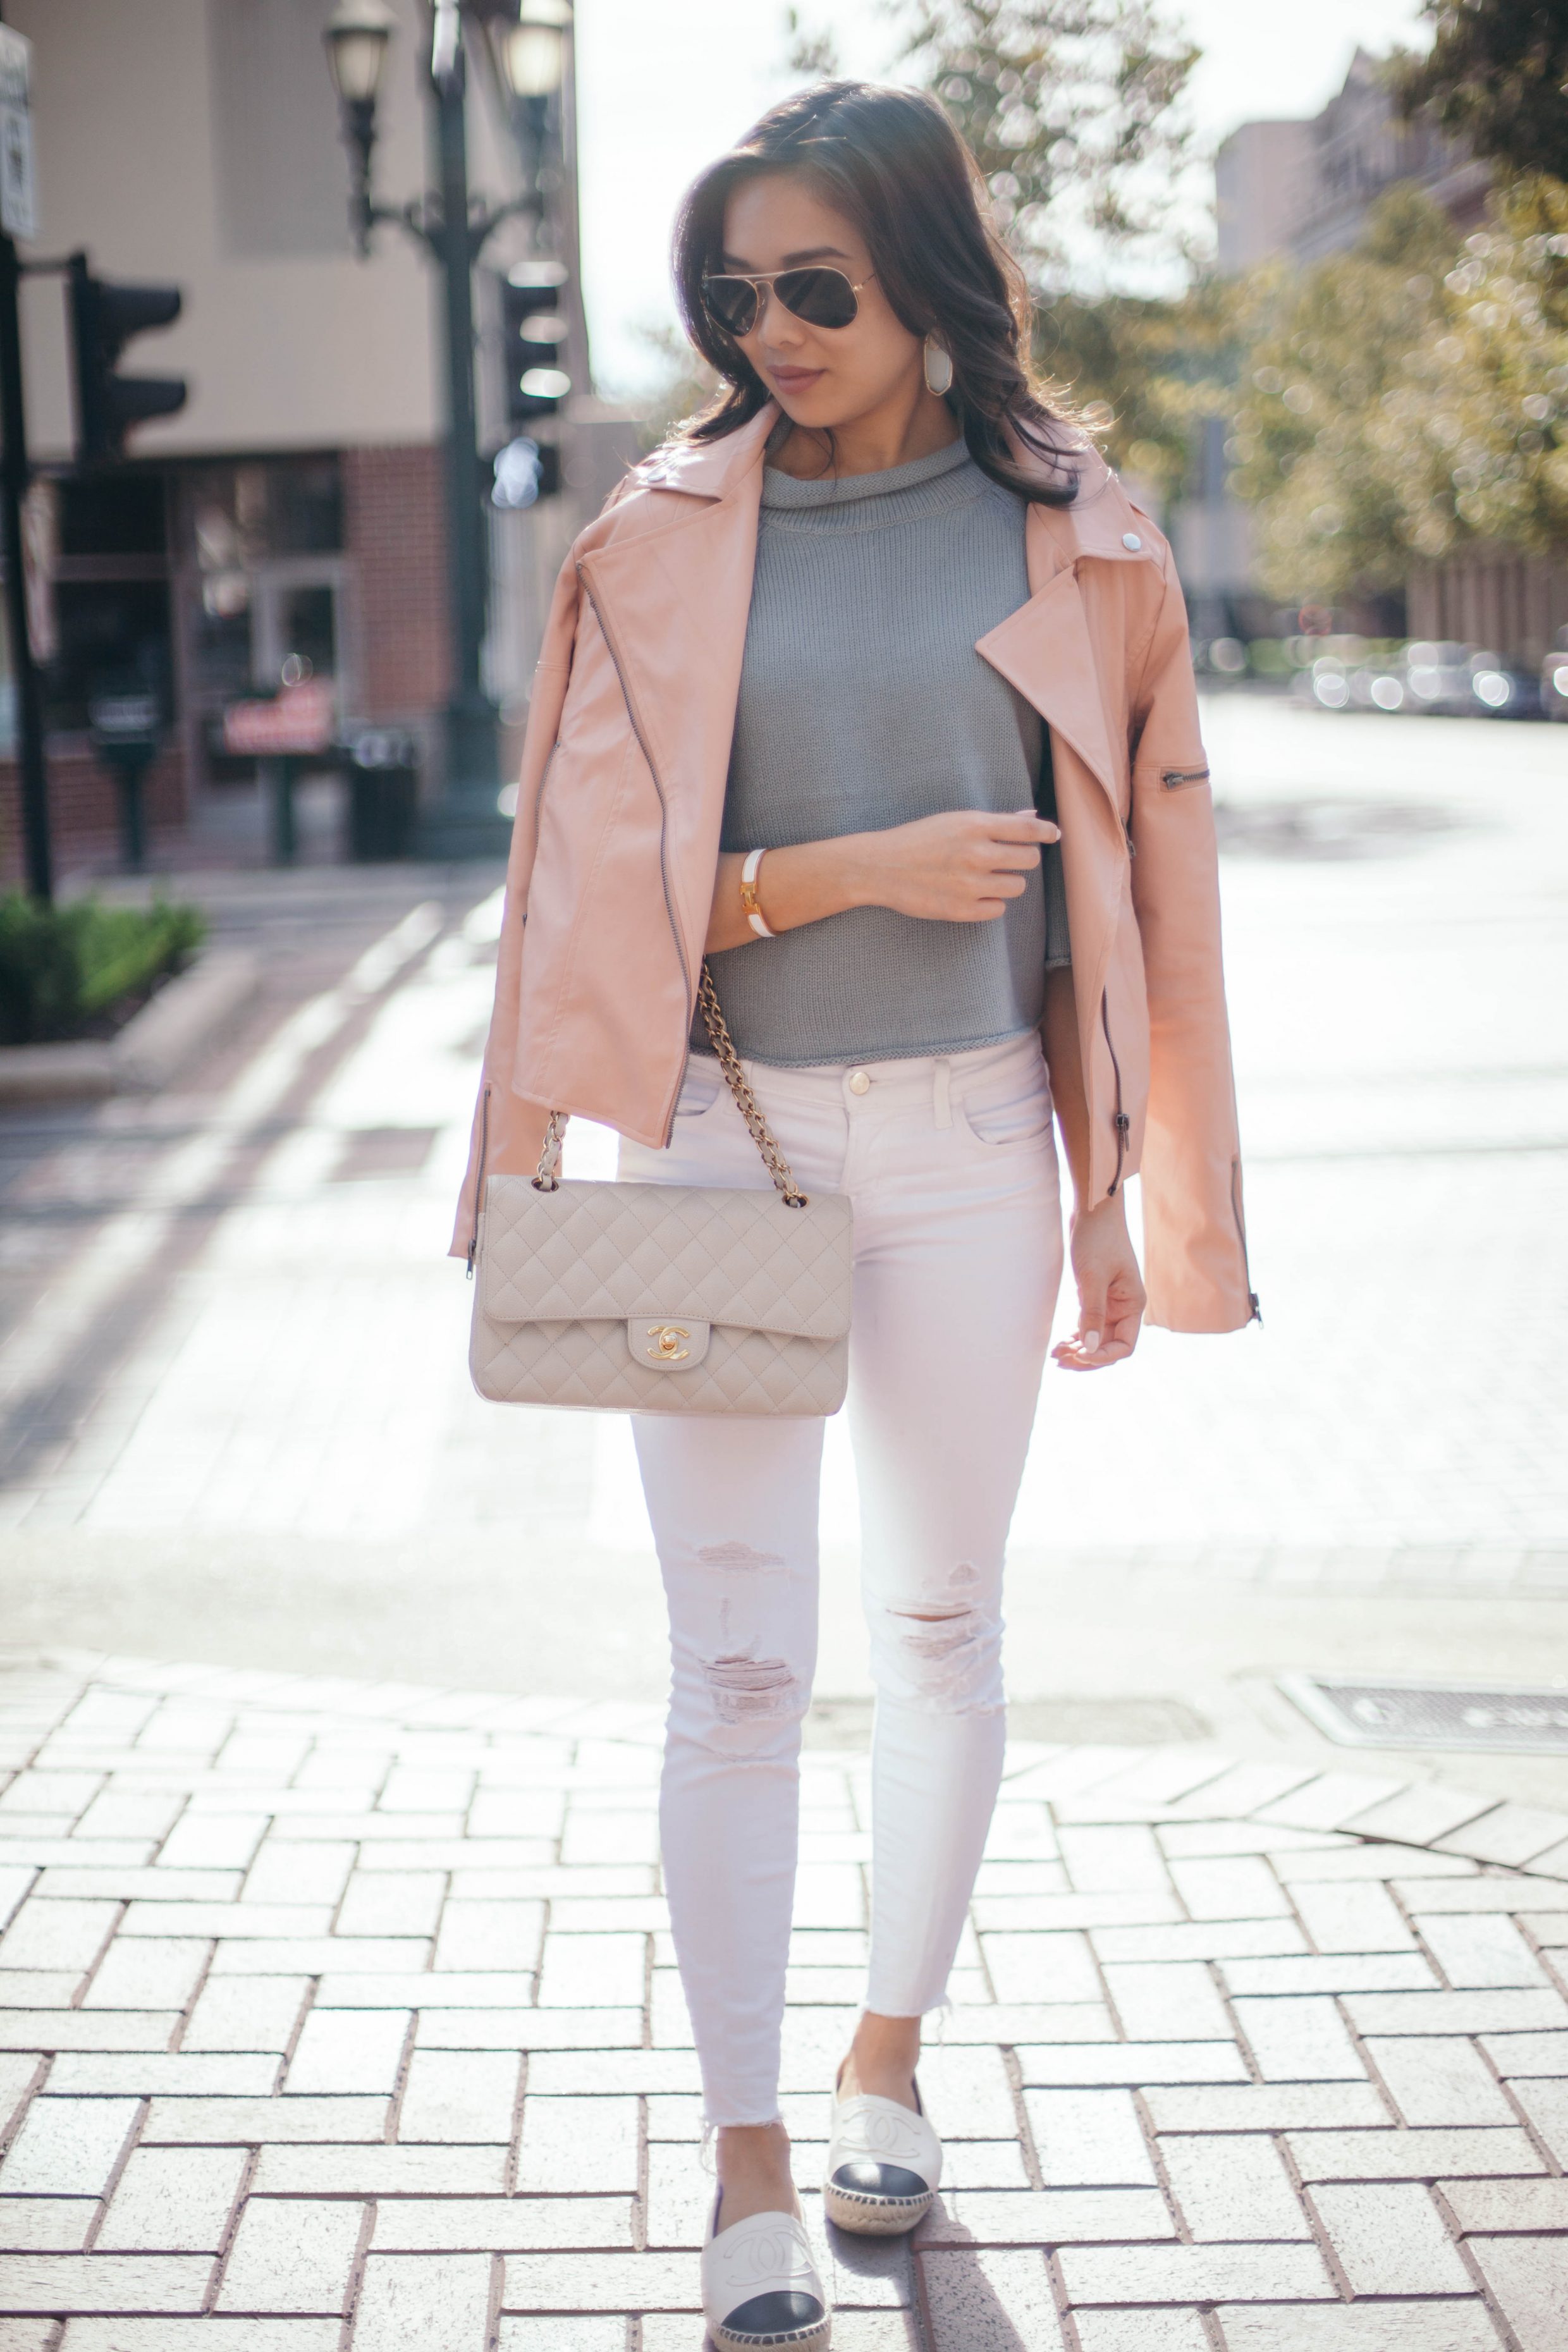 mink,pink,minkpink,deputy,blush,leather,jacket,j,brand,jeans,distressed,white,chanel,flap,bag,bb,dakota,jack,cropped,claudio,sweater,funnel,neck,swing,chanel,espadrilles,houston,downtown,main,street,salmon,smoked,the,honeymoon,cafe,review,food,brunch,sausage,biscuit,coffee,breakfast,